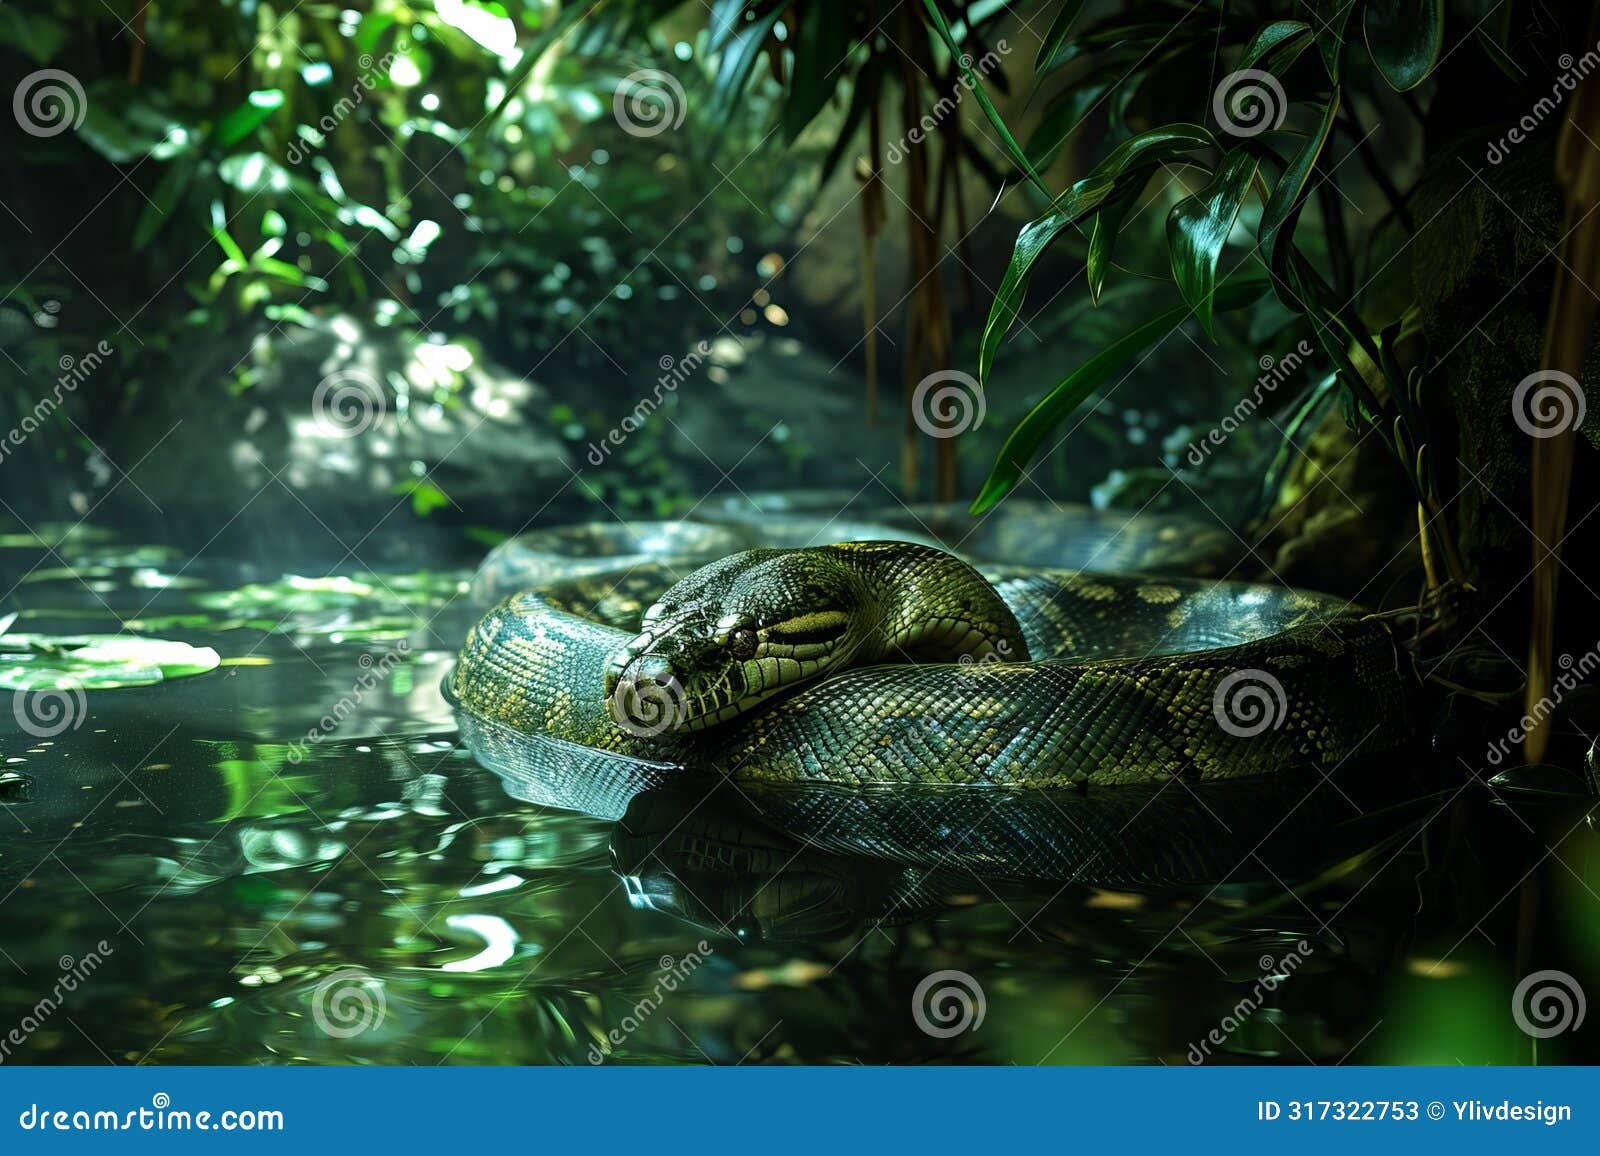 stealthy anaconda snake forest tropical. generate ai